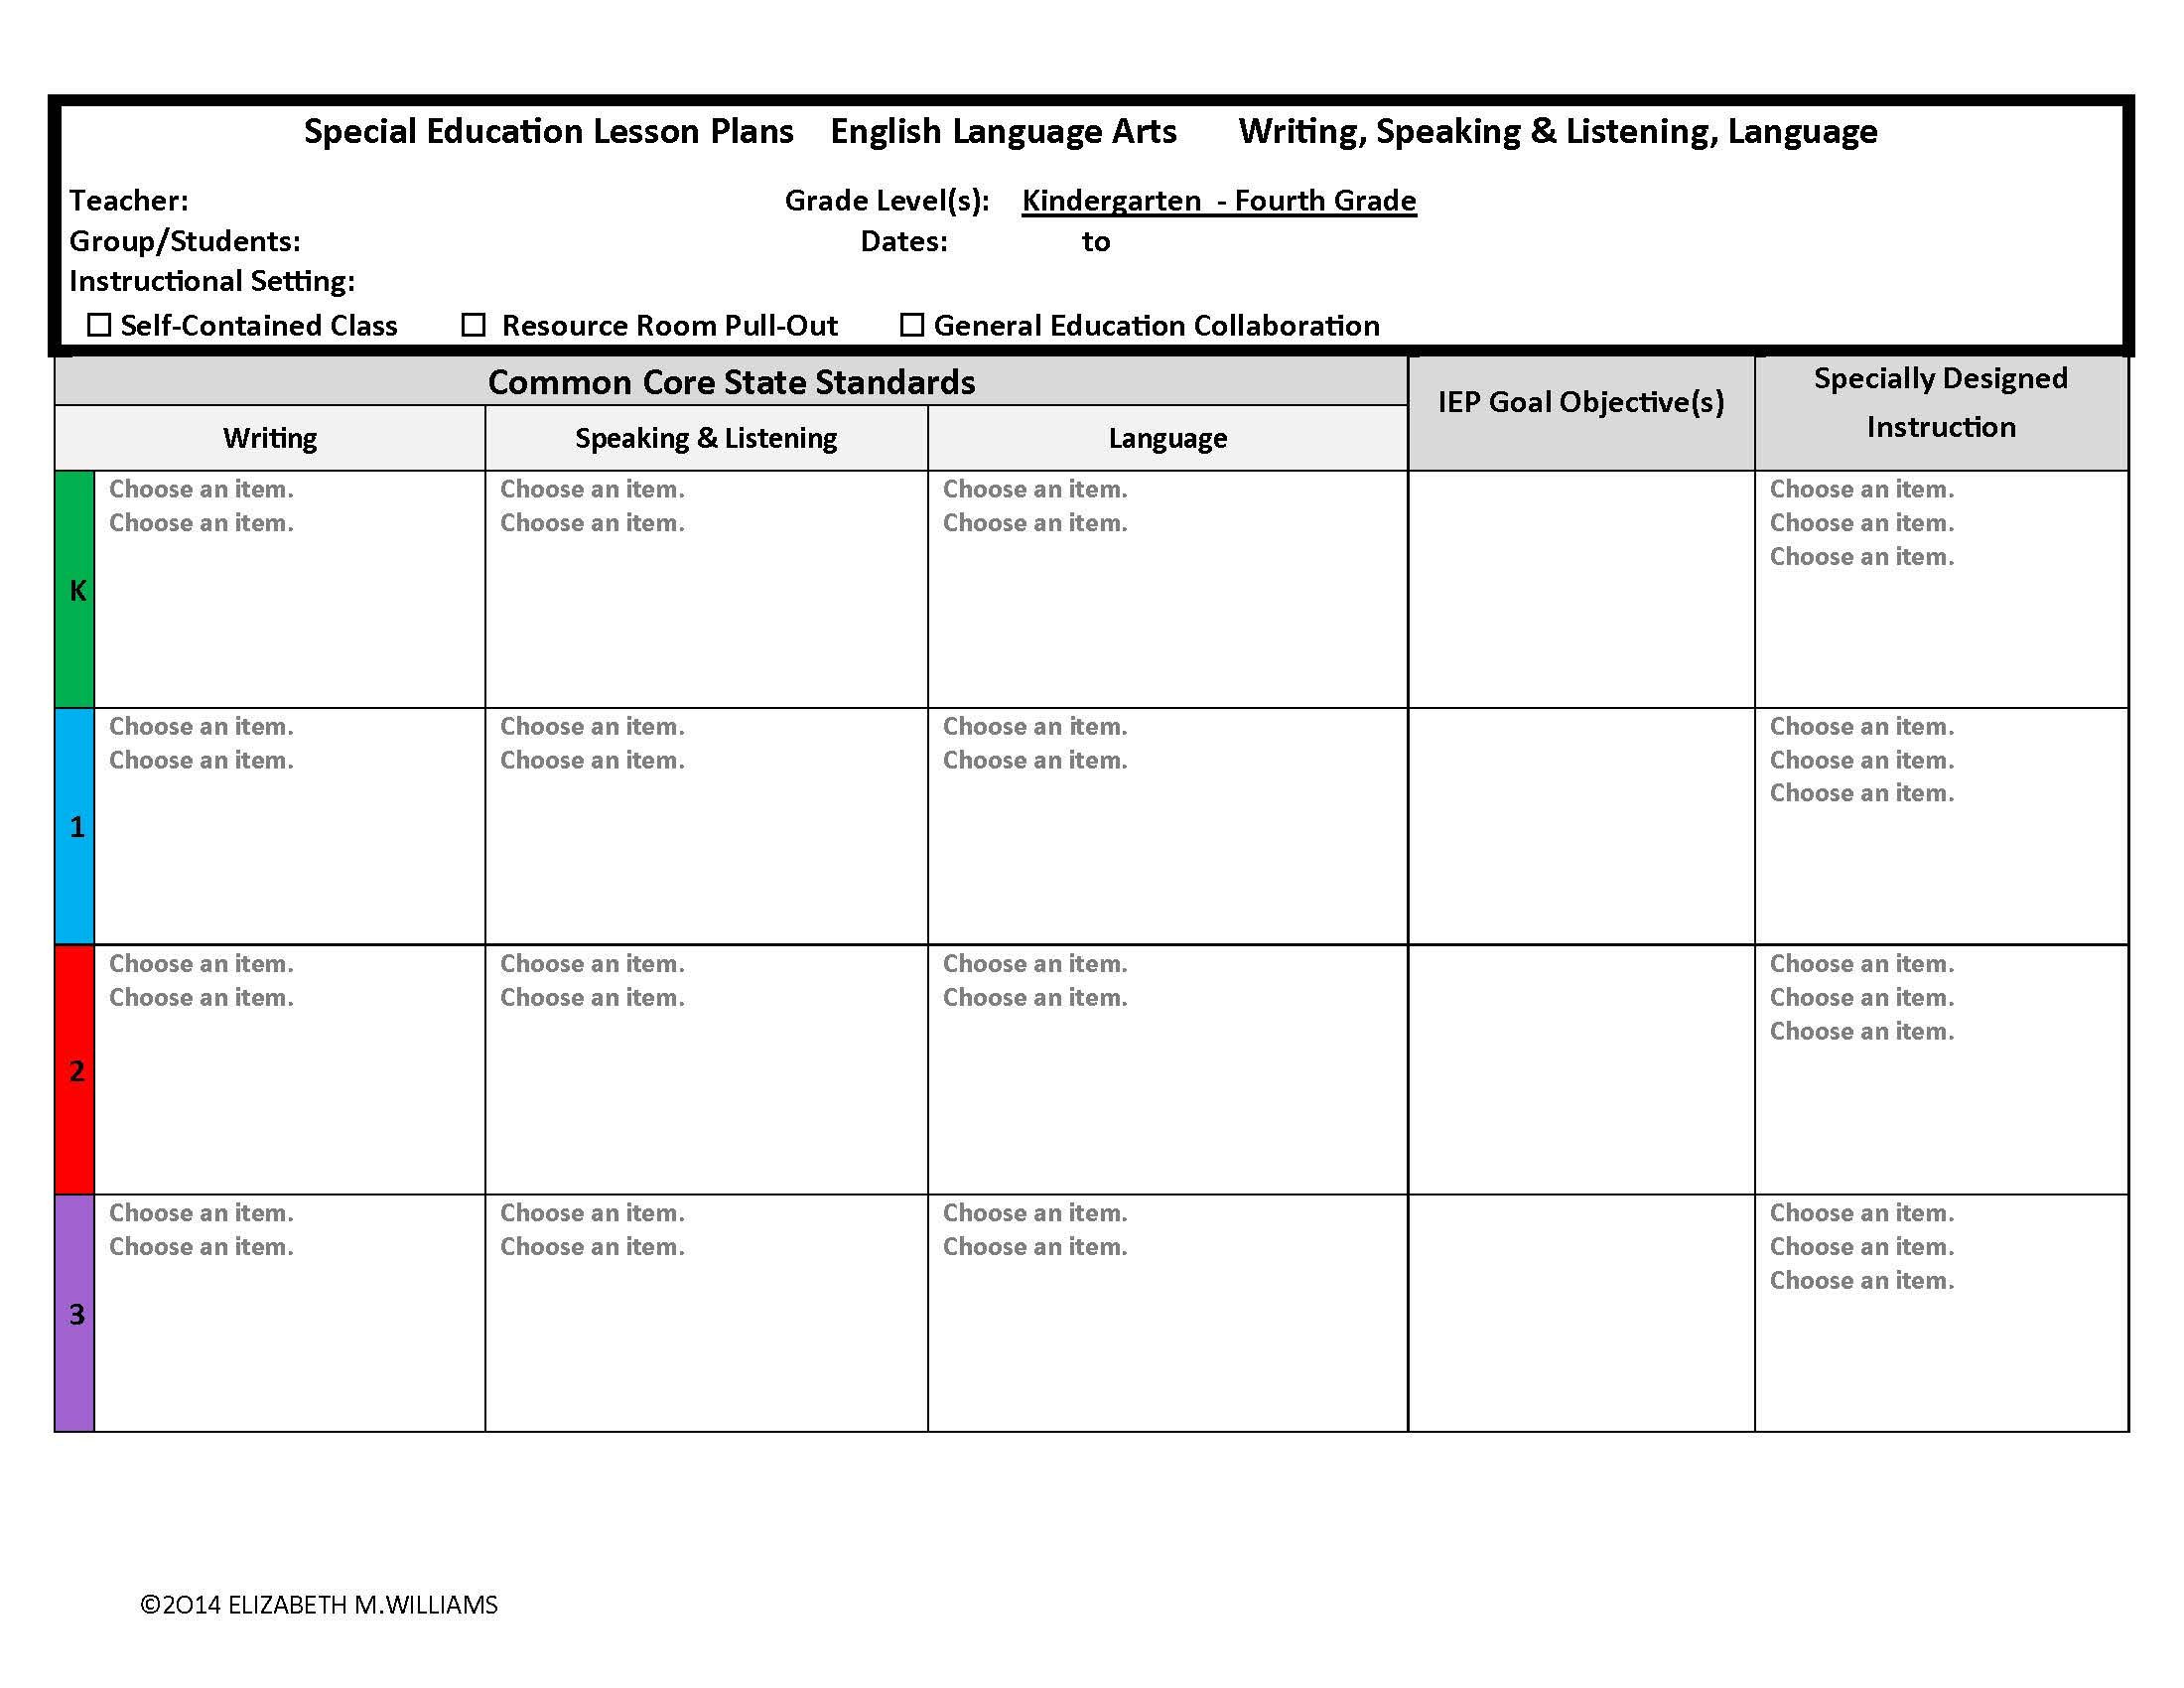 Special Education Lesson Plan Template Mon Core Aligned Interactive Special Education Lesson